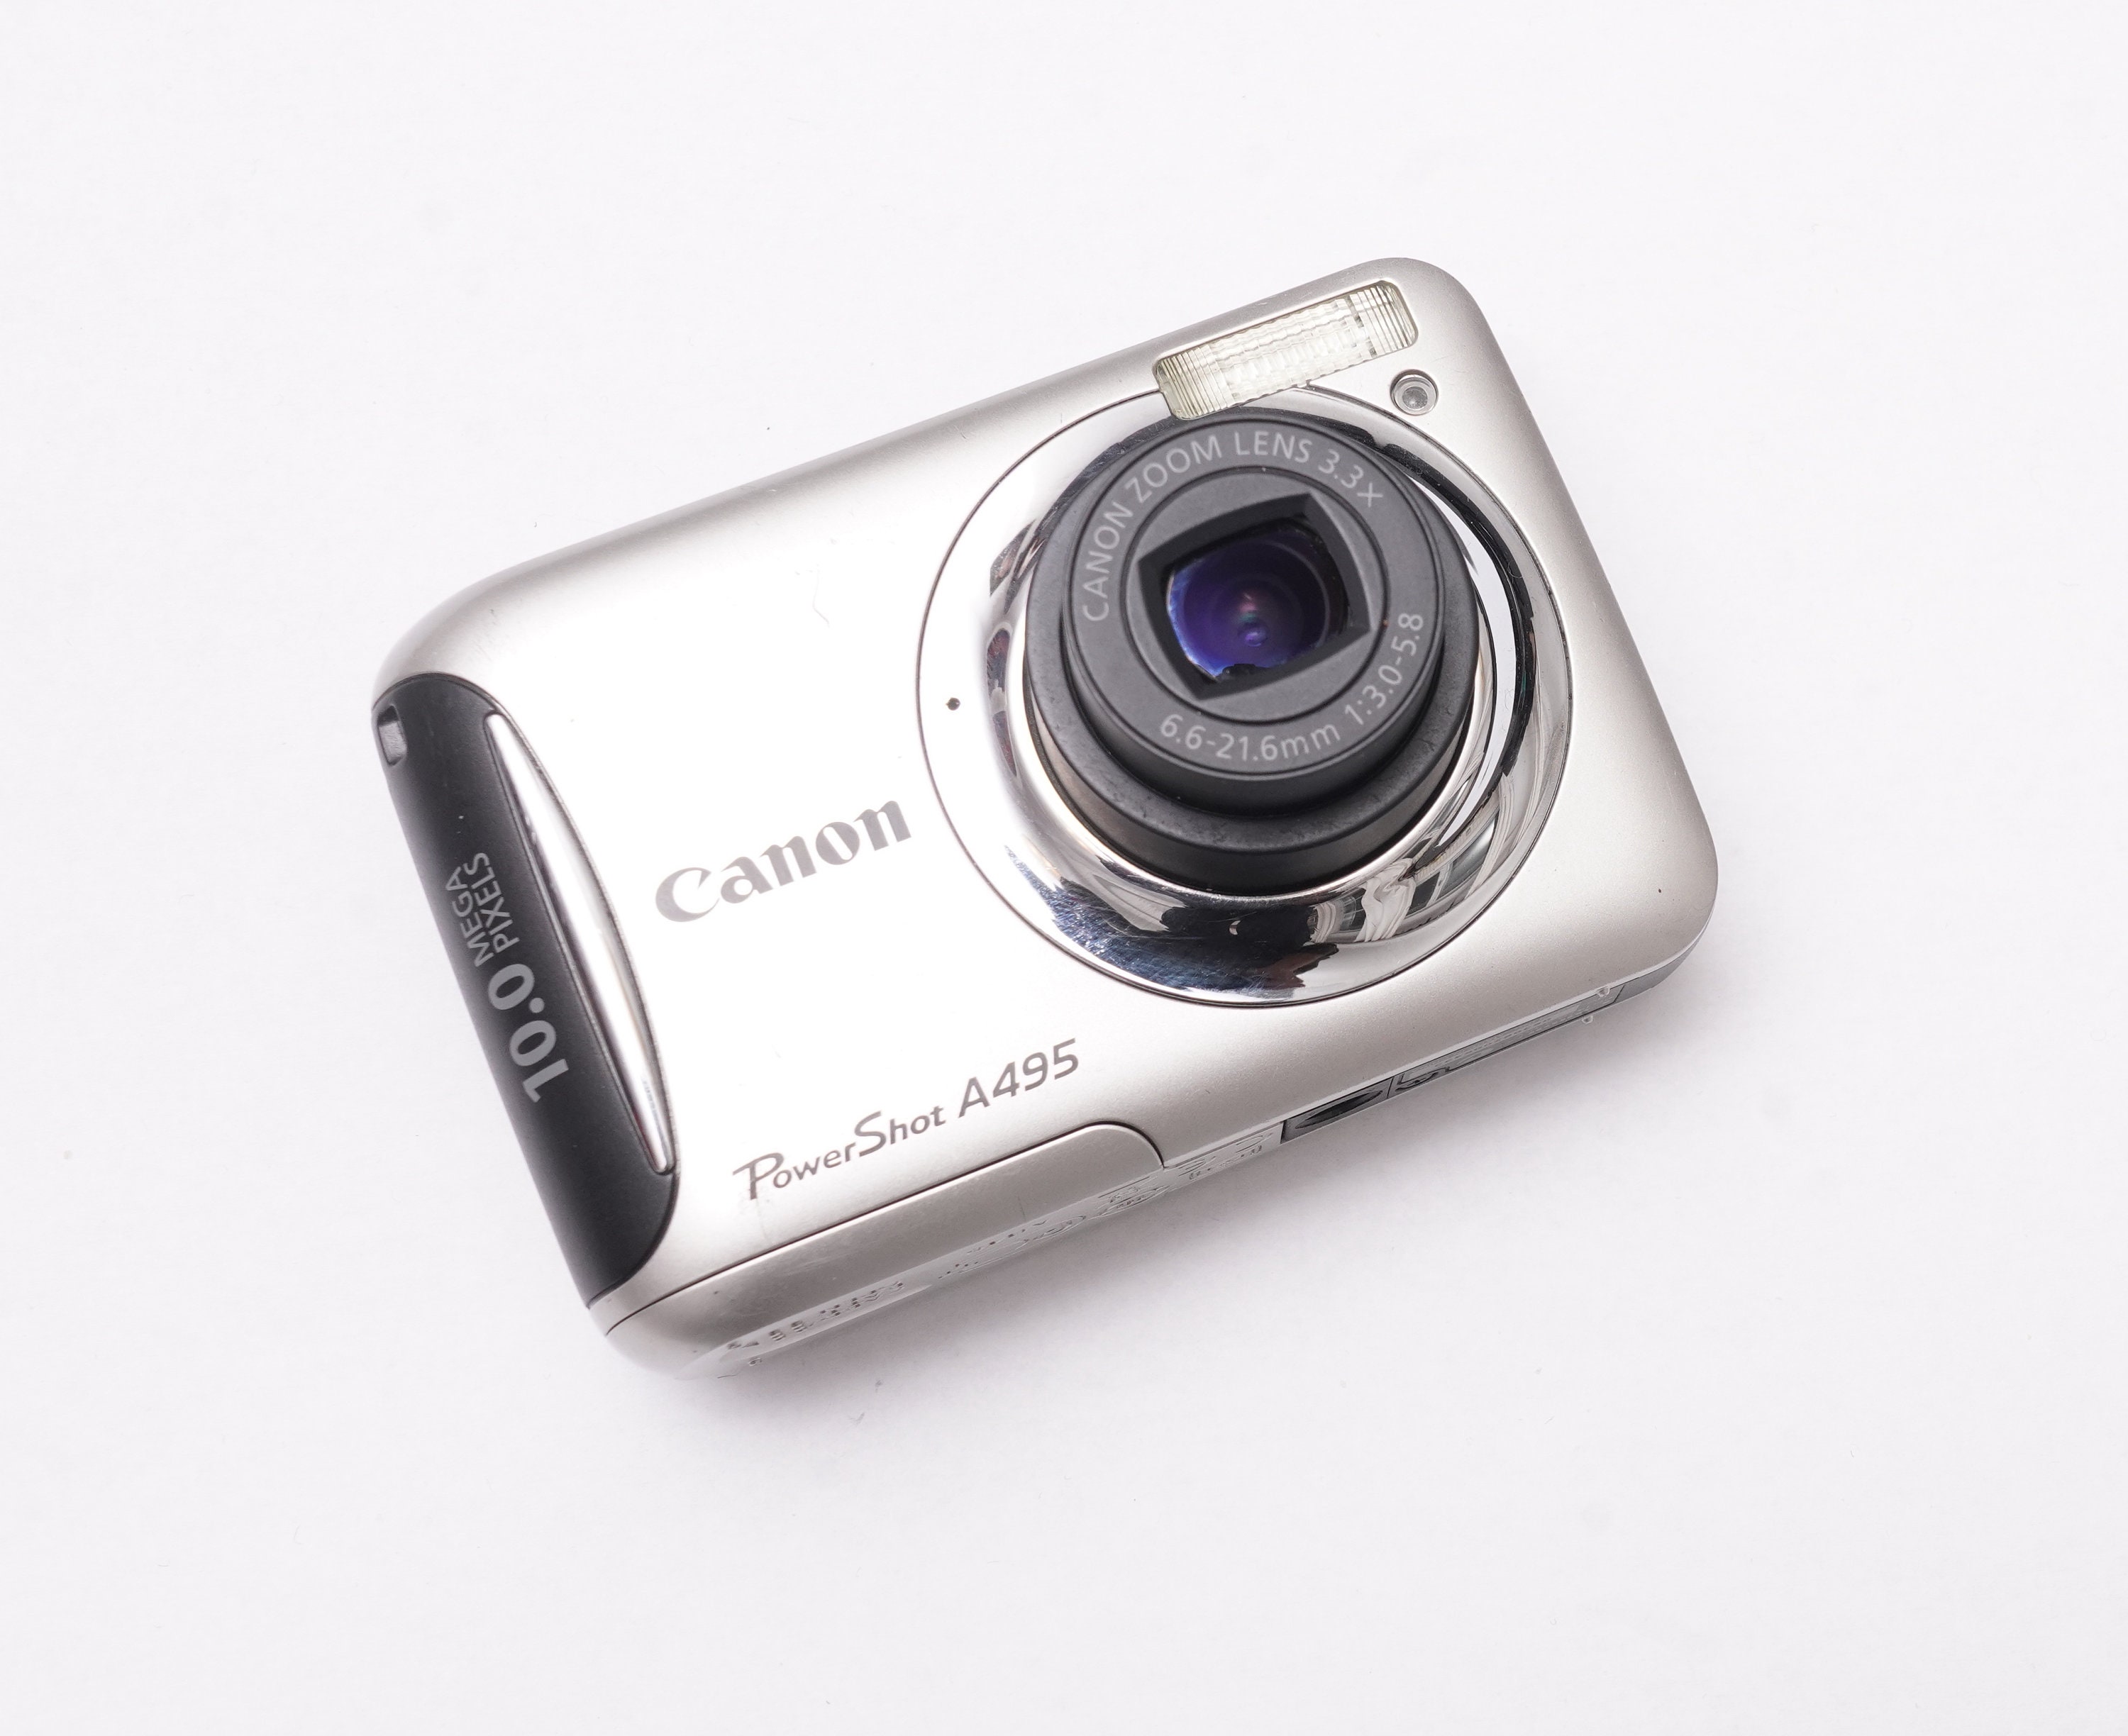 Canon PowerShot A495 Blue Point and Shoot Digital Camera